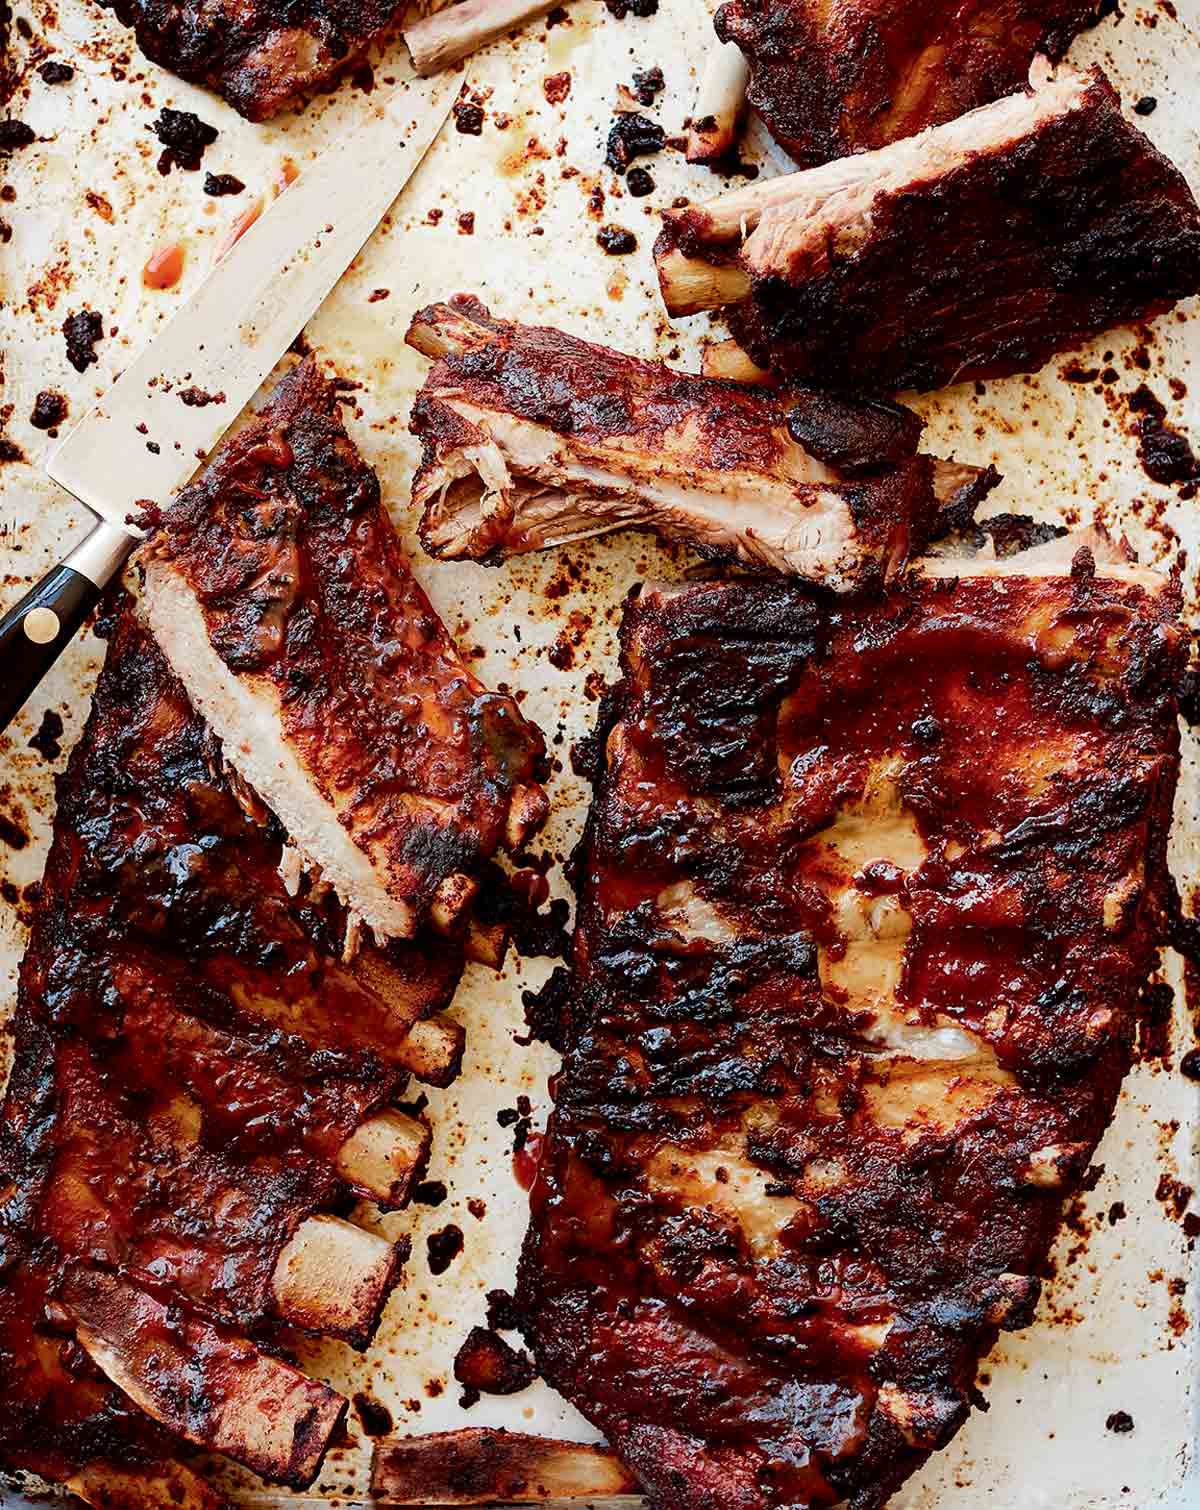 Two slabs of St. Louis style ribs with some cut into individual ribs and a knife lying in the middle.